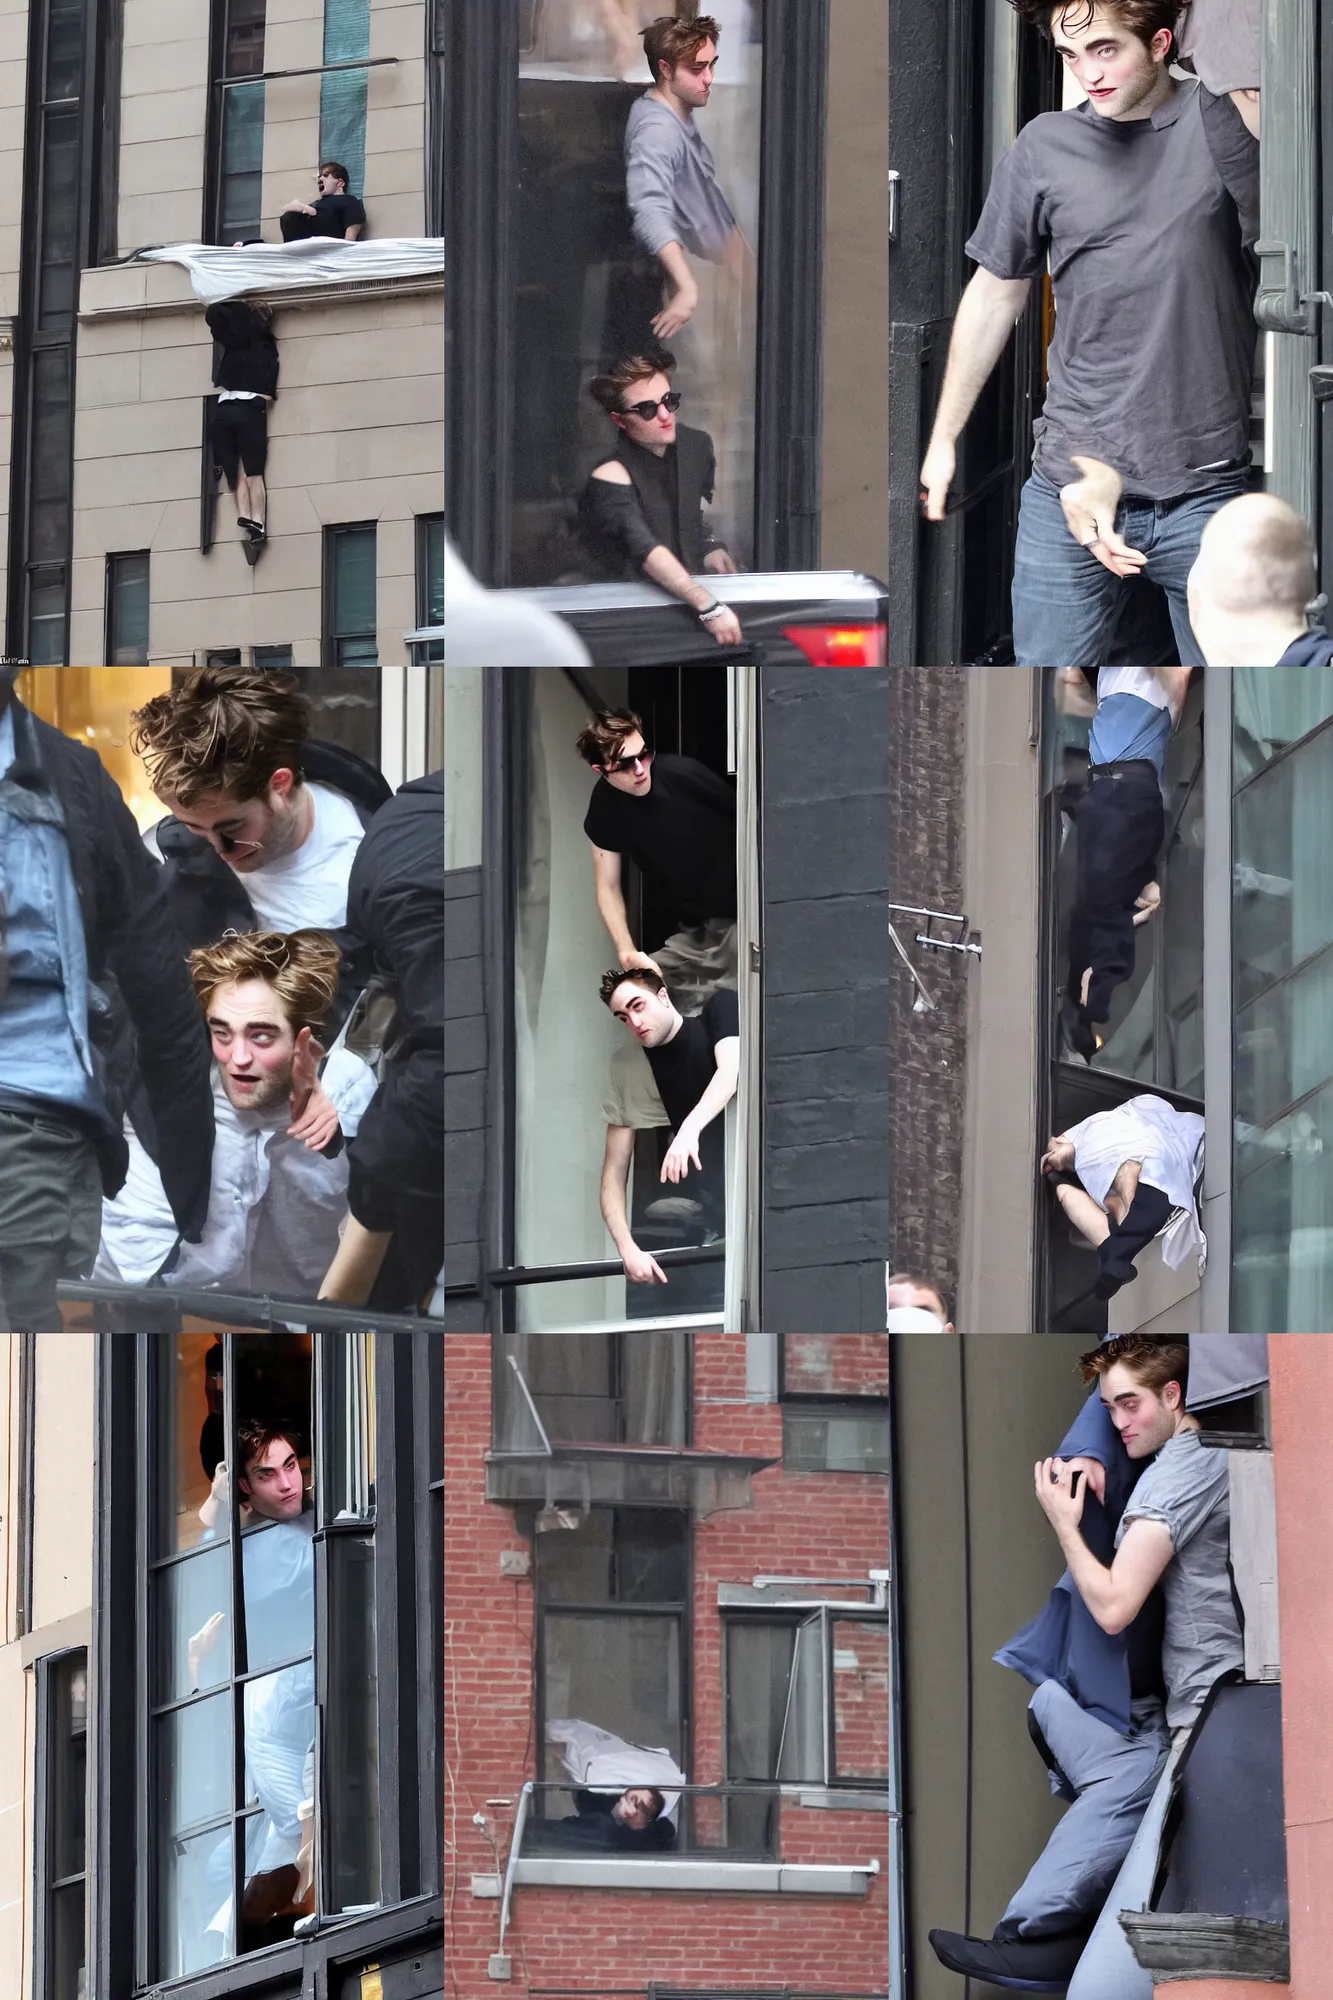 Prompt: robert pattinson's unconscious body flying into apartment window in new york city, photography